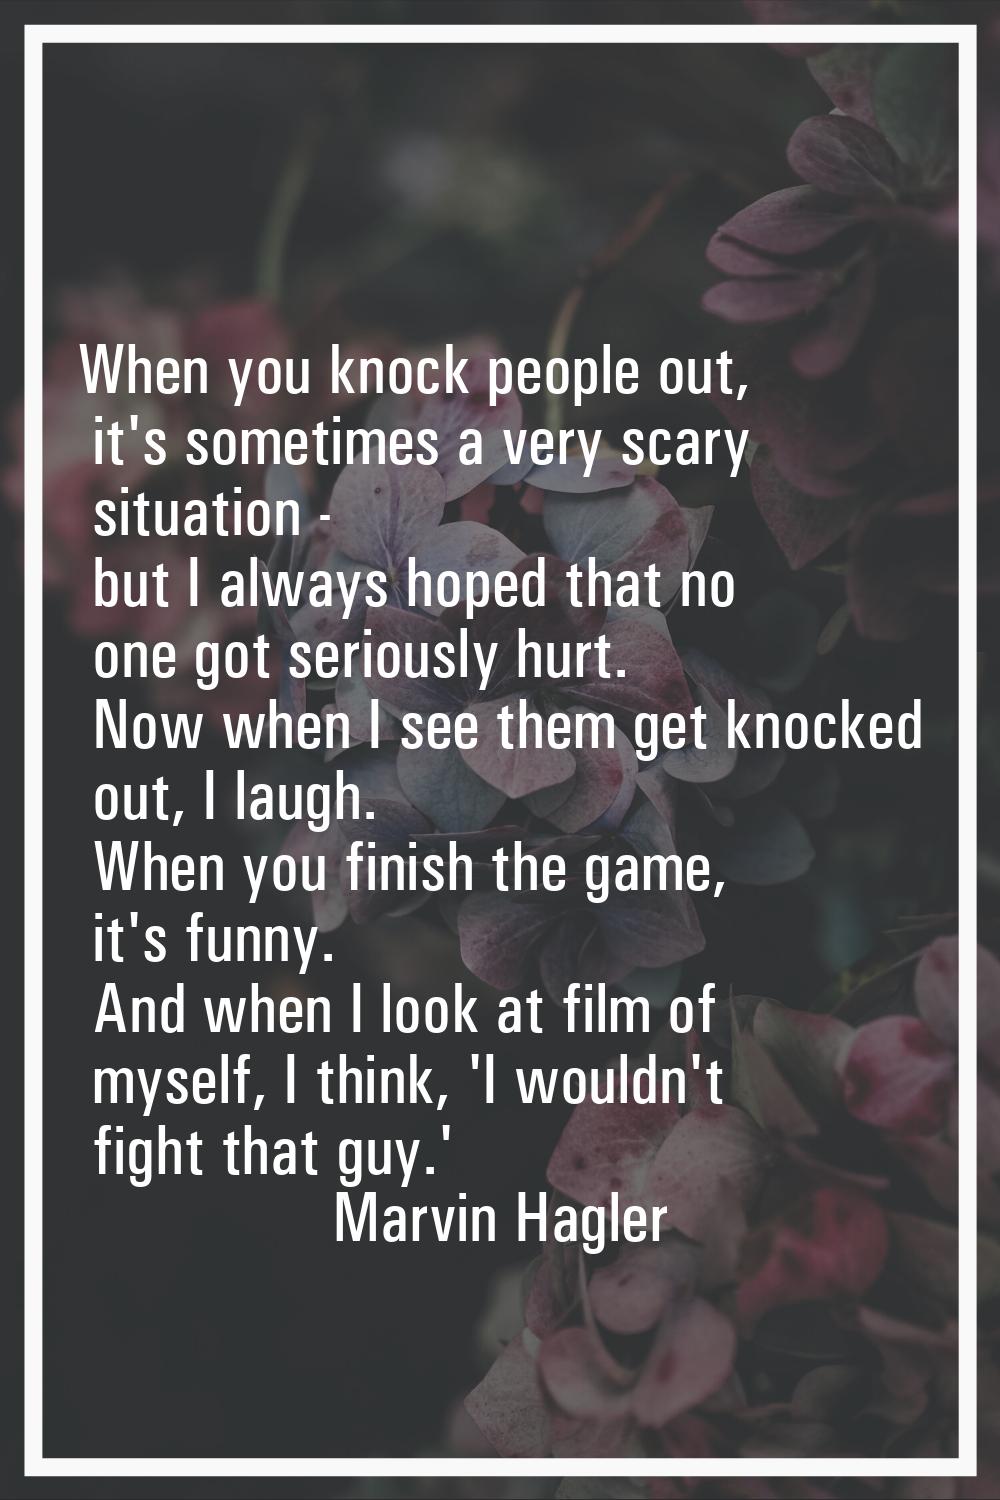 When you knock people out, it's sometimes a very scary situation - but I always hoped that no one g